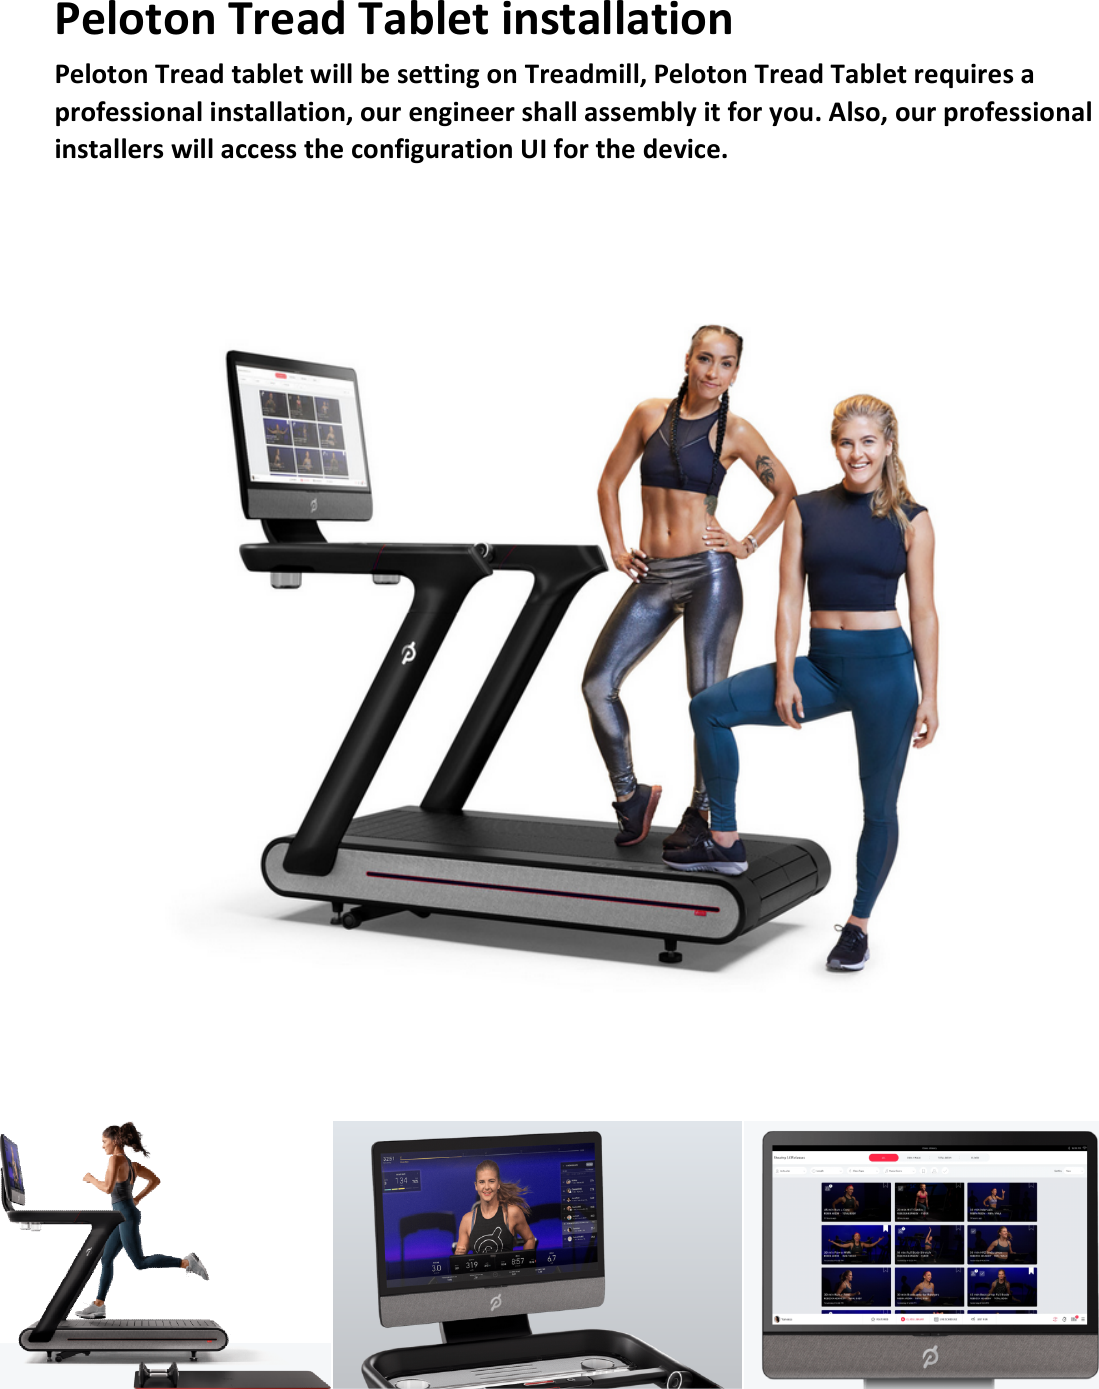 Peloton Tread Tablet installation   Peloton Tread tablet will be setting on Treadmill, Peloton Tread Tablet requires a professional installation, our engineer shall assembly it for you. Also, our professional installers will access the configuration UI for the device.            